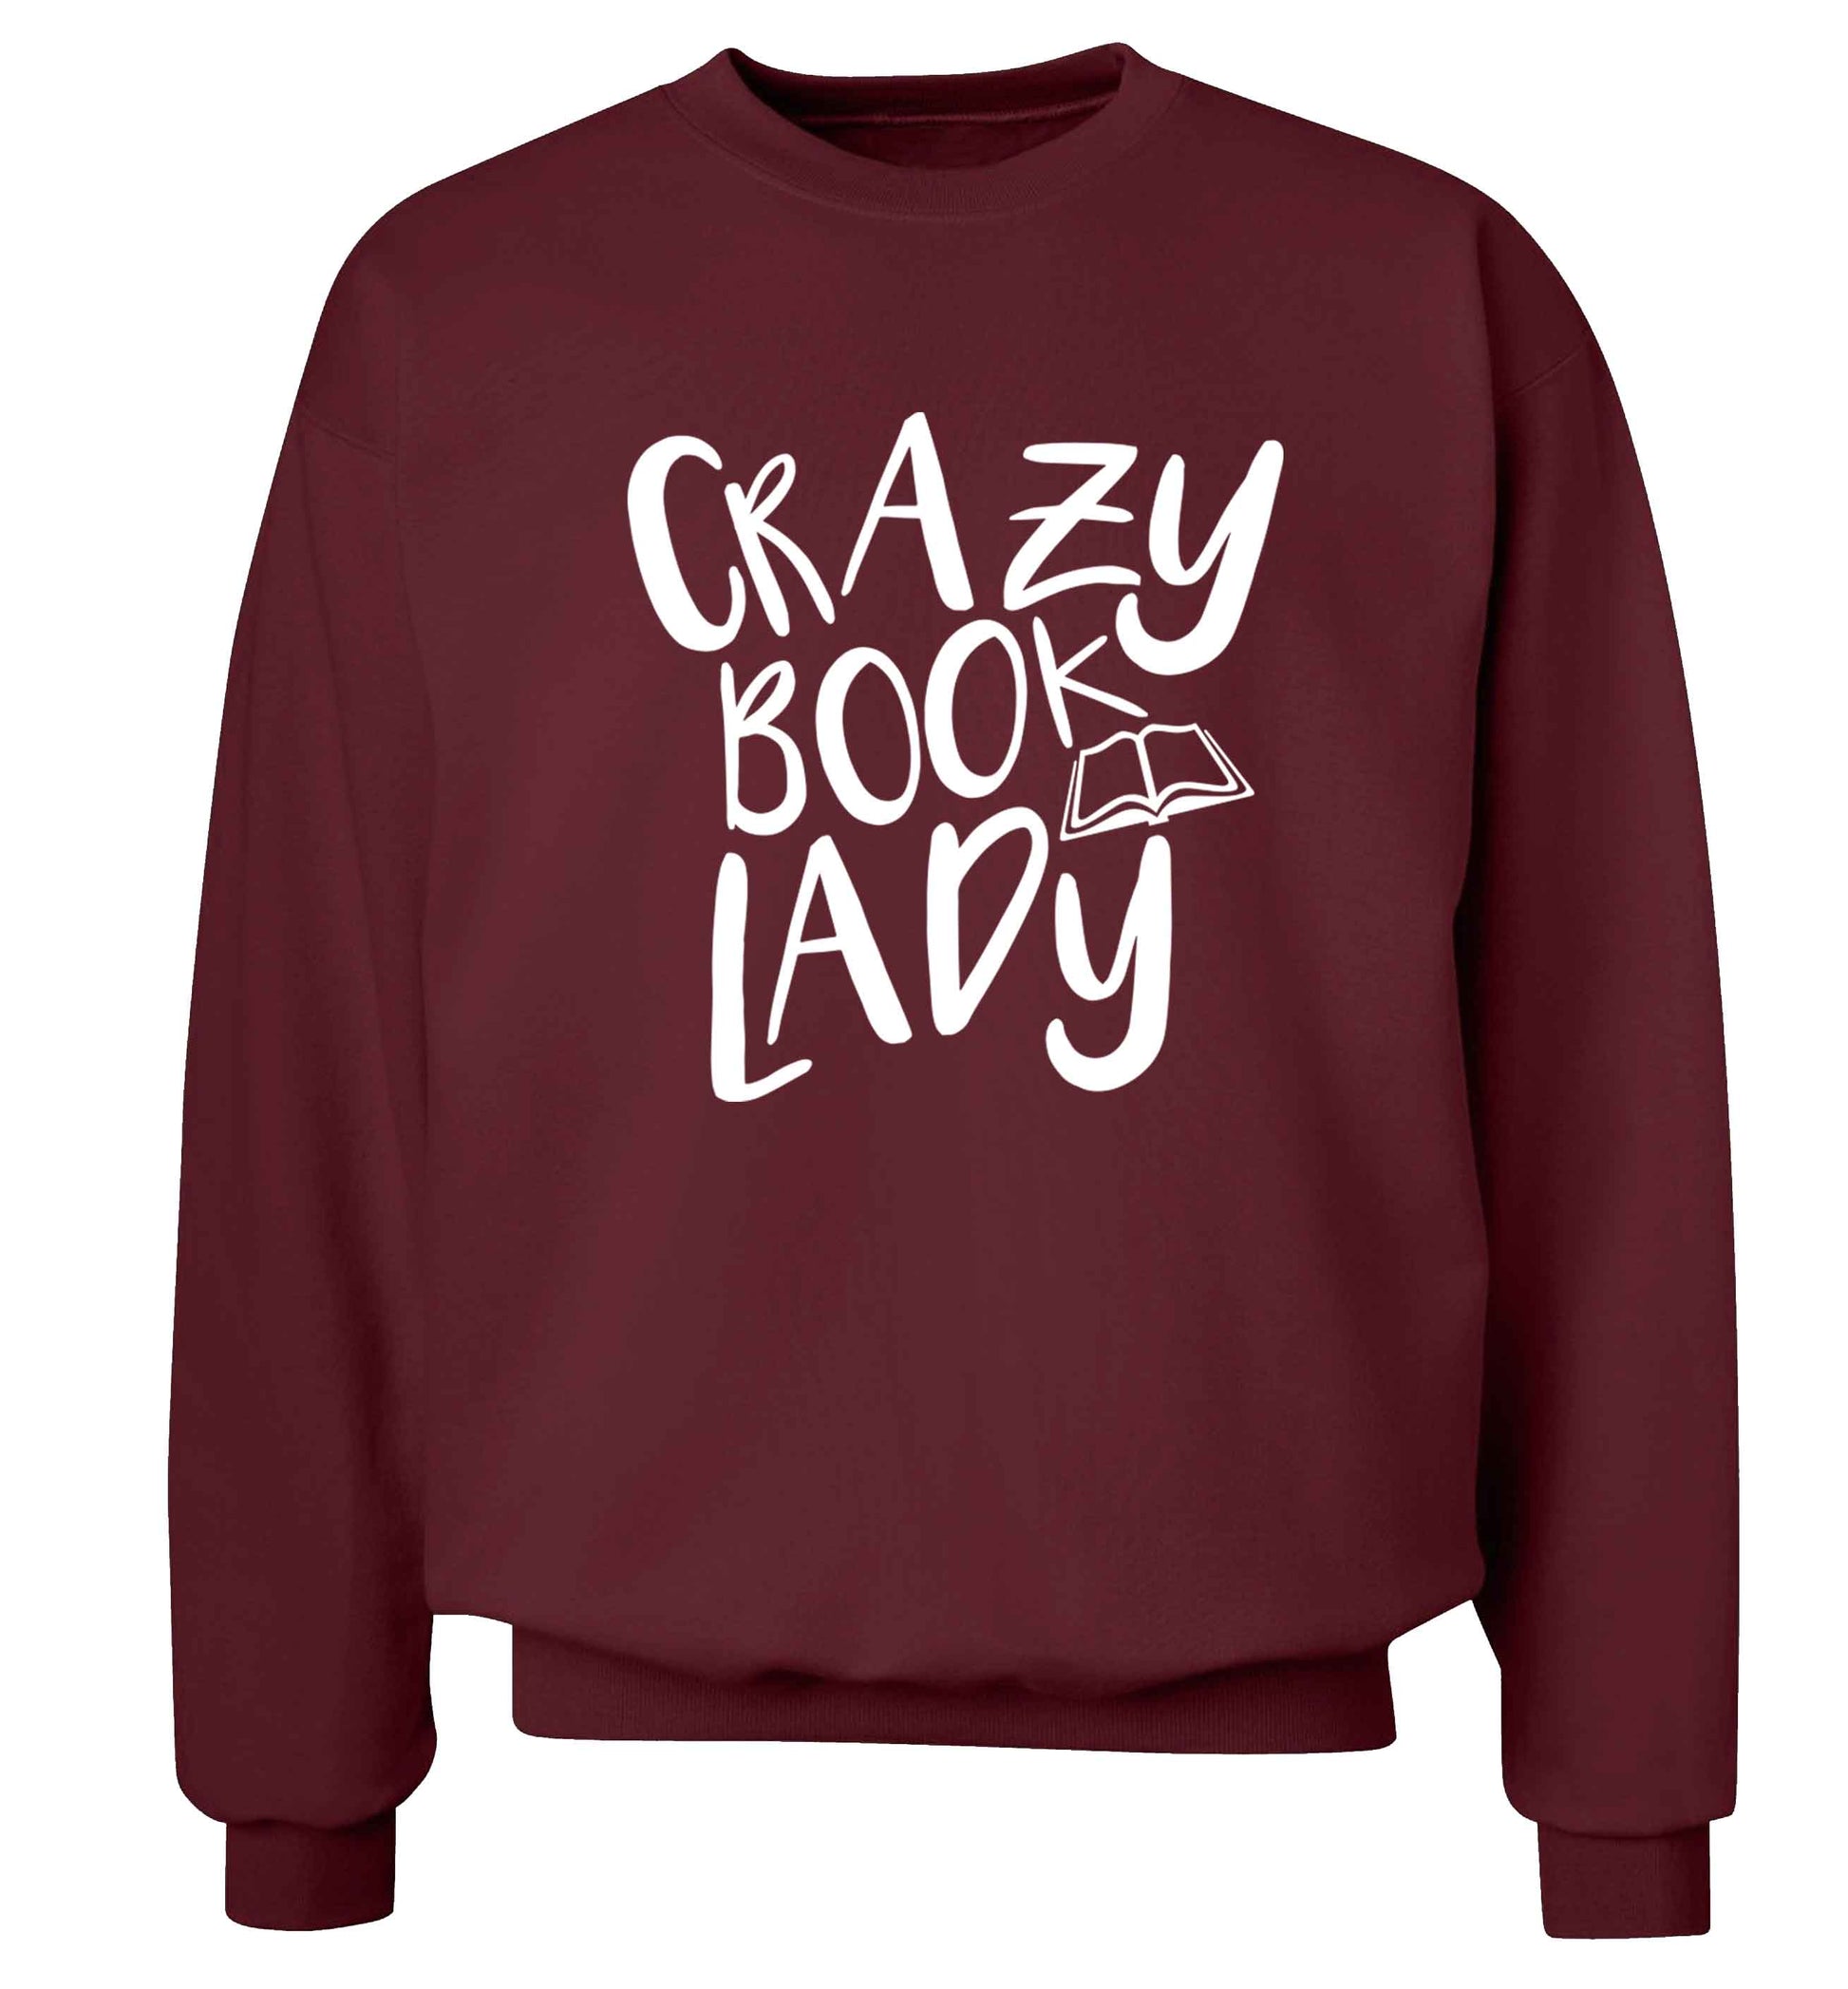 Crazy book lady Adult's unisex maroon Sweater 2XL